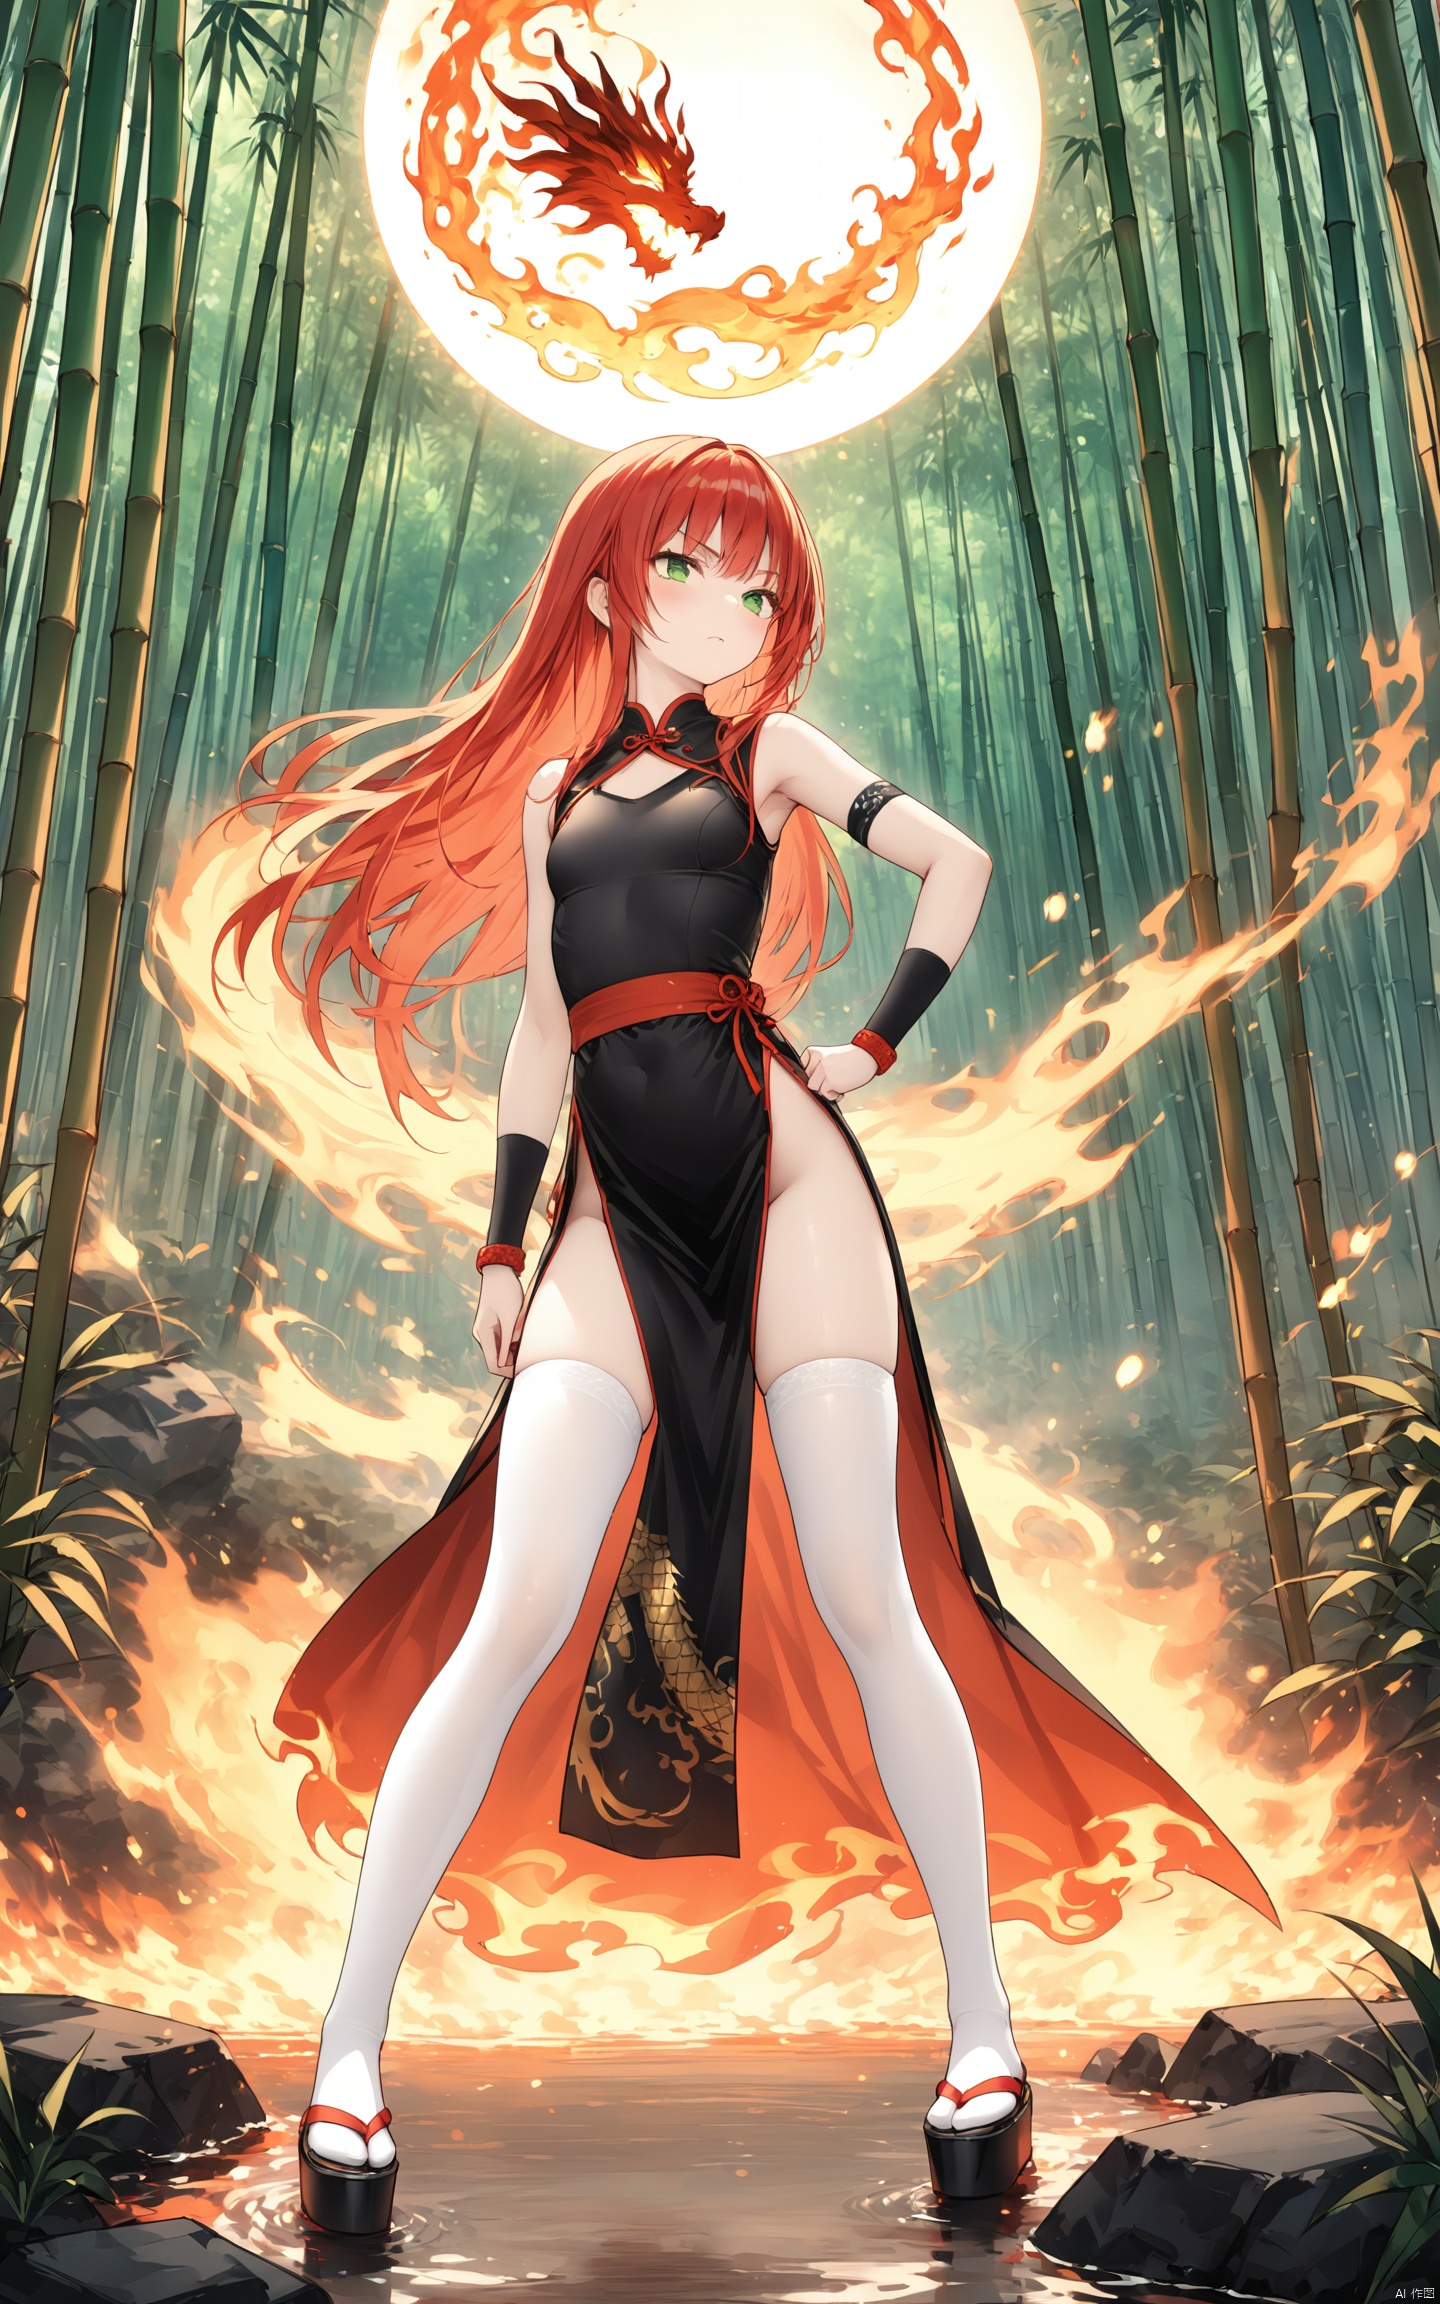 (Masterpiece), (Best Quality), Illustration, Super Detailed, hdr, Depth of Field, (Color), (White Stockings),1 character, resembling Kanzuki-style female fighter, full body, dressed in a provocative crimson and black qipao-inspired outfit reminiscent of the character 'Mai Shiranui', tight-fitting and slit up to the thigh, revealing athletic legs, accessorized with golden dragon ornaments along the edges and a flowing sash that doubles as a weapon, long fiery red hair styled in dynamic waves framing her face and extending past her hips, striking green eyes filled with intensity, wearing traditional Japanese geta sandals, poised in a ready stance, hands ignited with flames, ready to unleash a fireball attack, mid-battle expression, muscular build with toned abs, wearing a protective wristband on each arm, set against a backdrop of moonlit bamboo forest."